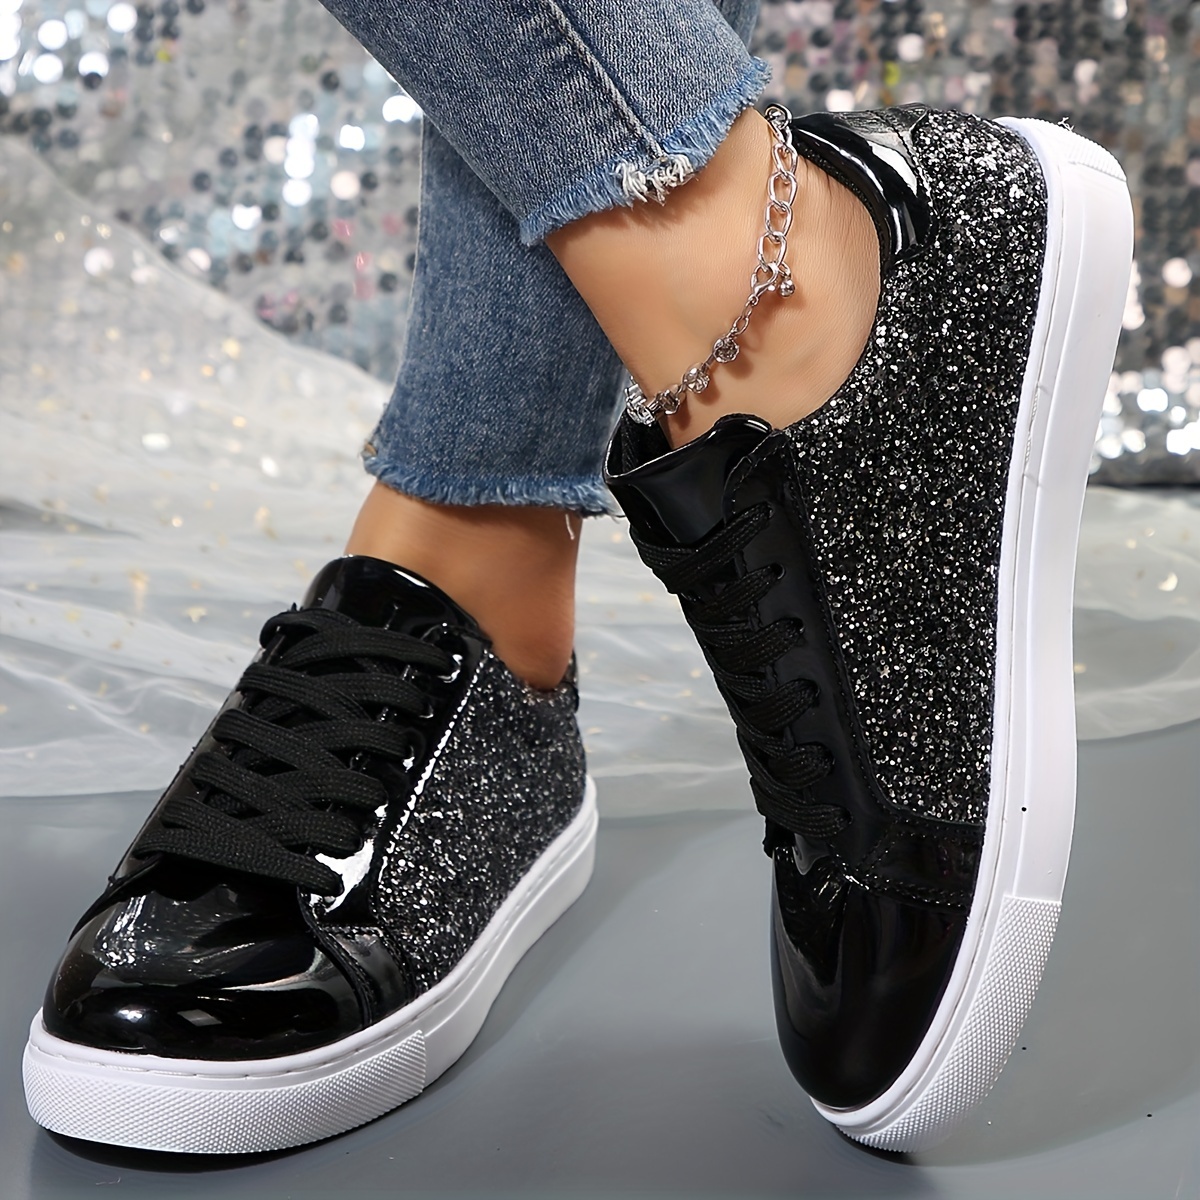 Women's Glitter Sequins Sneakers, Fashion Lace Up Low Top Skate Shoes,  Comfortable All-Match Walking Flat Shoes for Music Festival